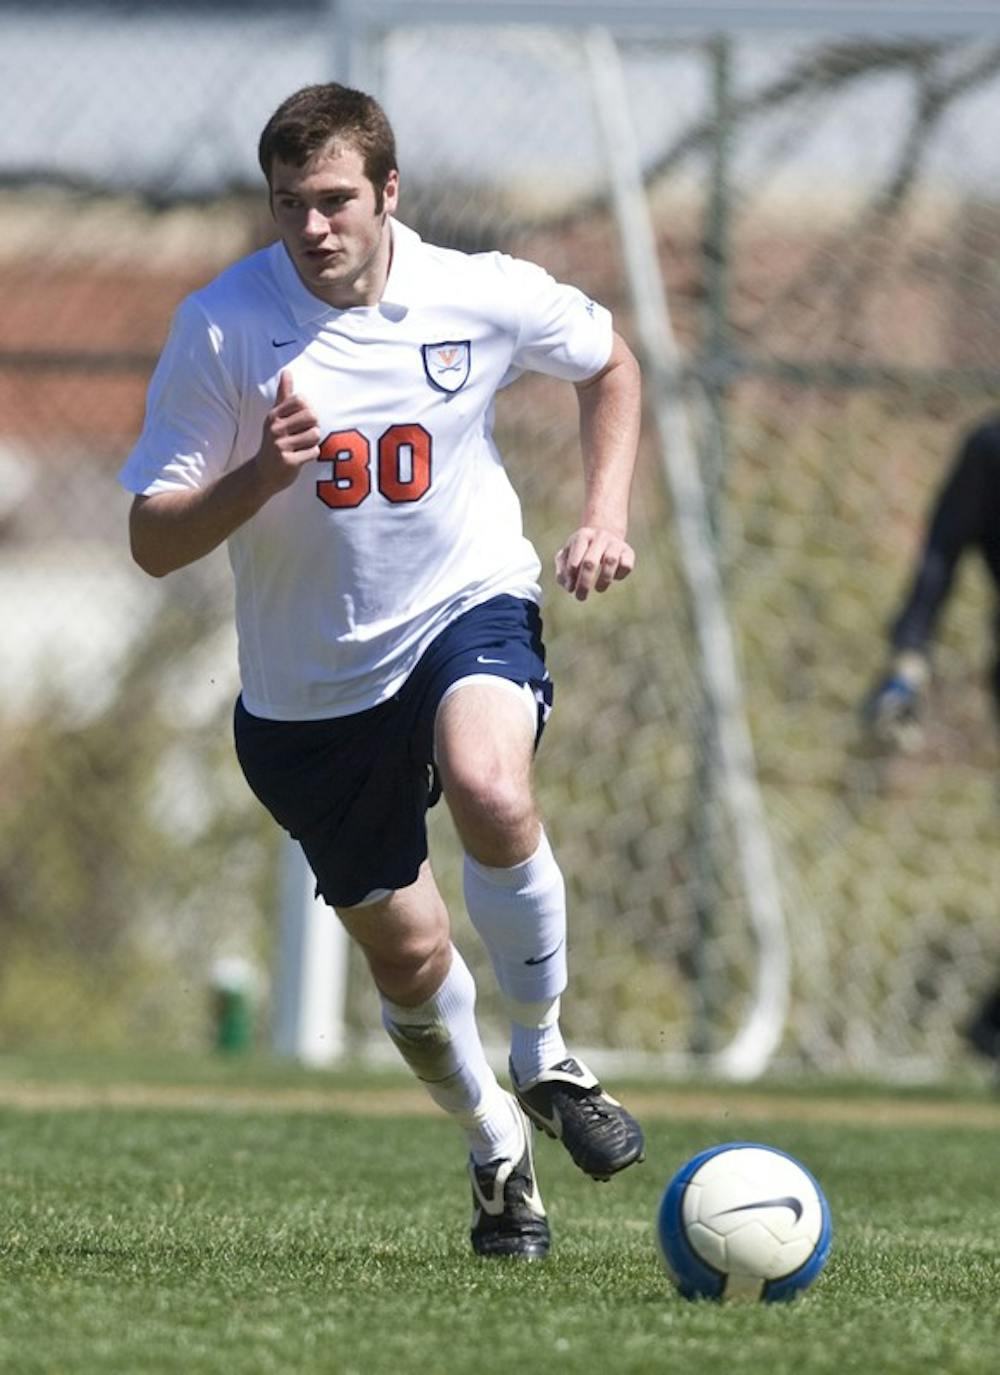 Virginia Cavaliers defender/midfielder Sean Hiller (30).  The North Carolina State Wolfpack defeated the Virginia Cavaliers 1-0 in NCAA Men's Soccer during a spring scrimmage at the Klockner Stadium practice field on the Grounds of the University of Virginia in Charlottesville, VA on April 4, 2009.